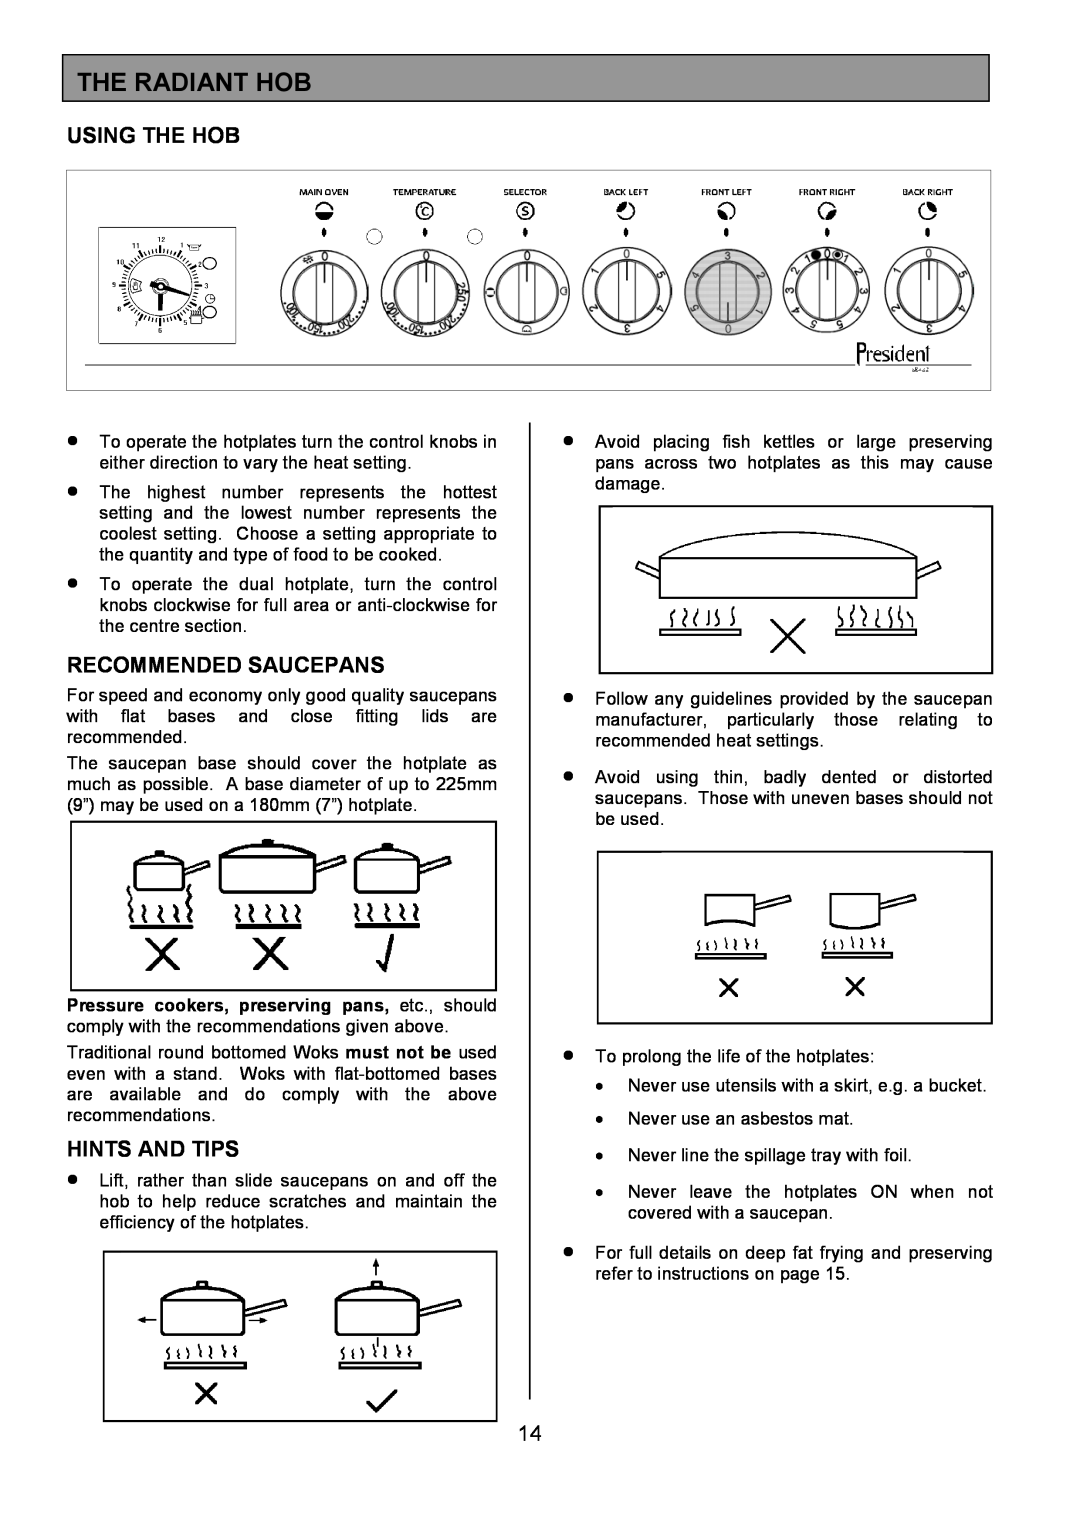 Tricity Bendix SB432 installation instructions The Radiant Hob, Using The Hob, Recommended Saucepans, Hints And Tips 